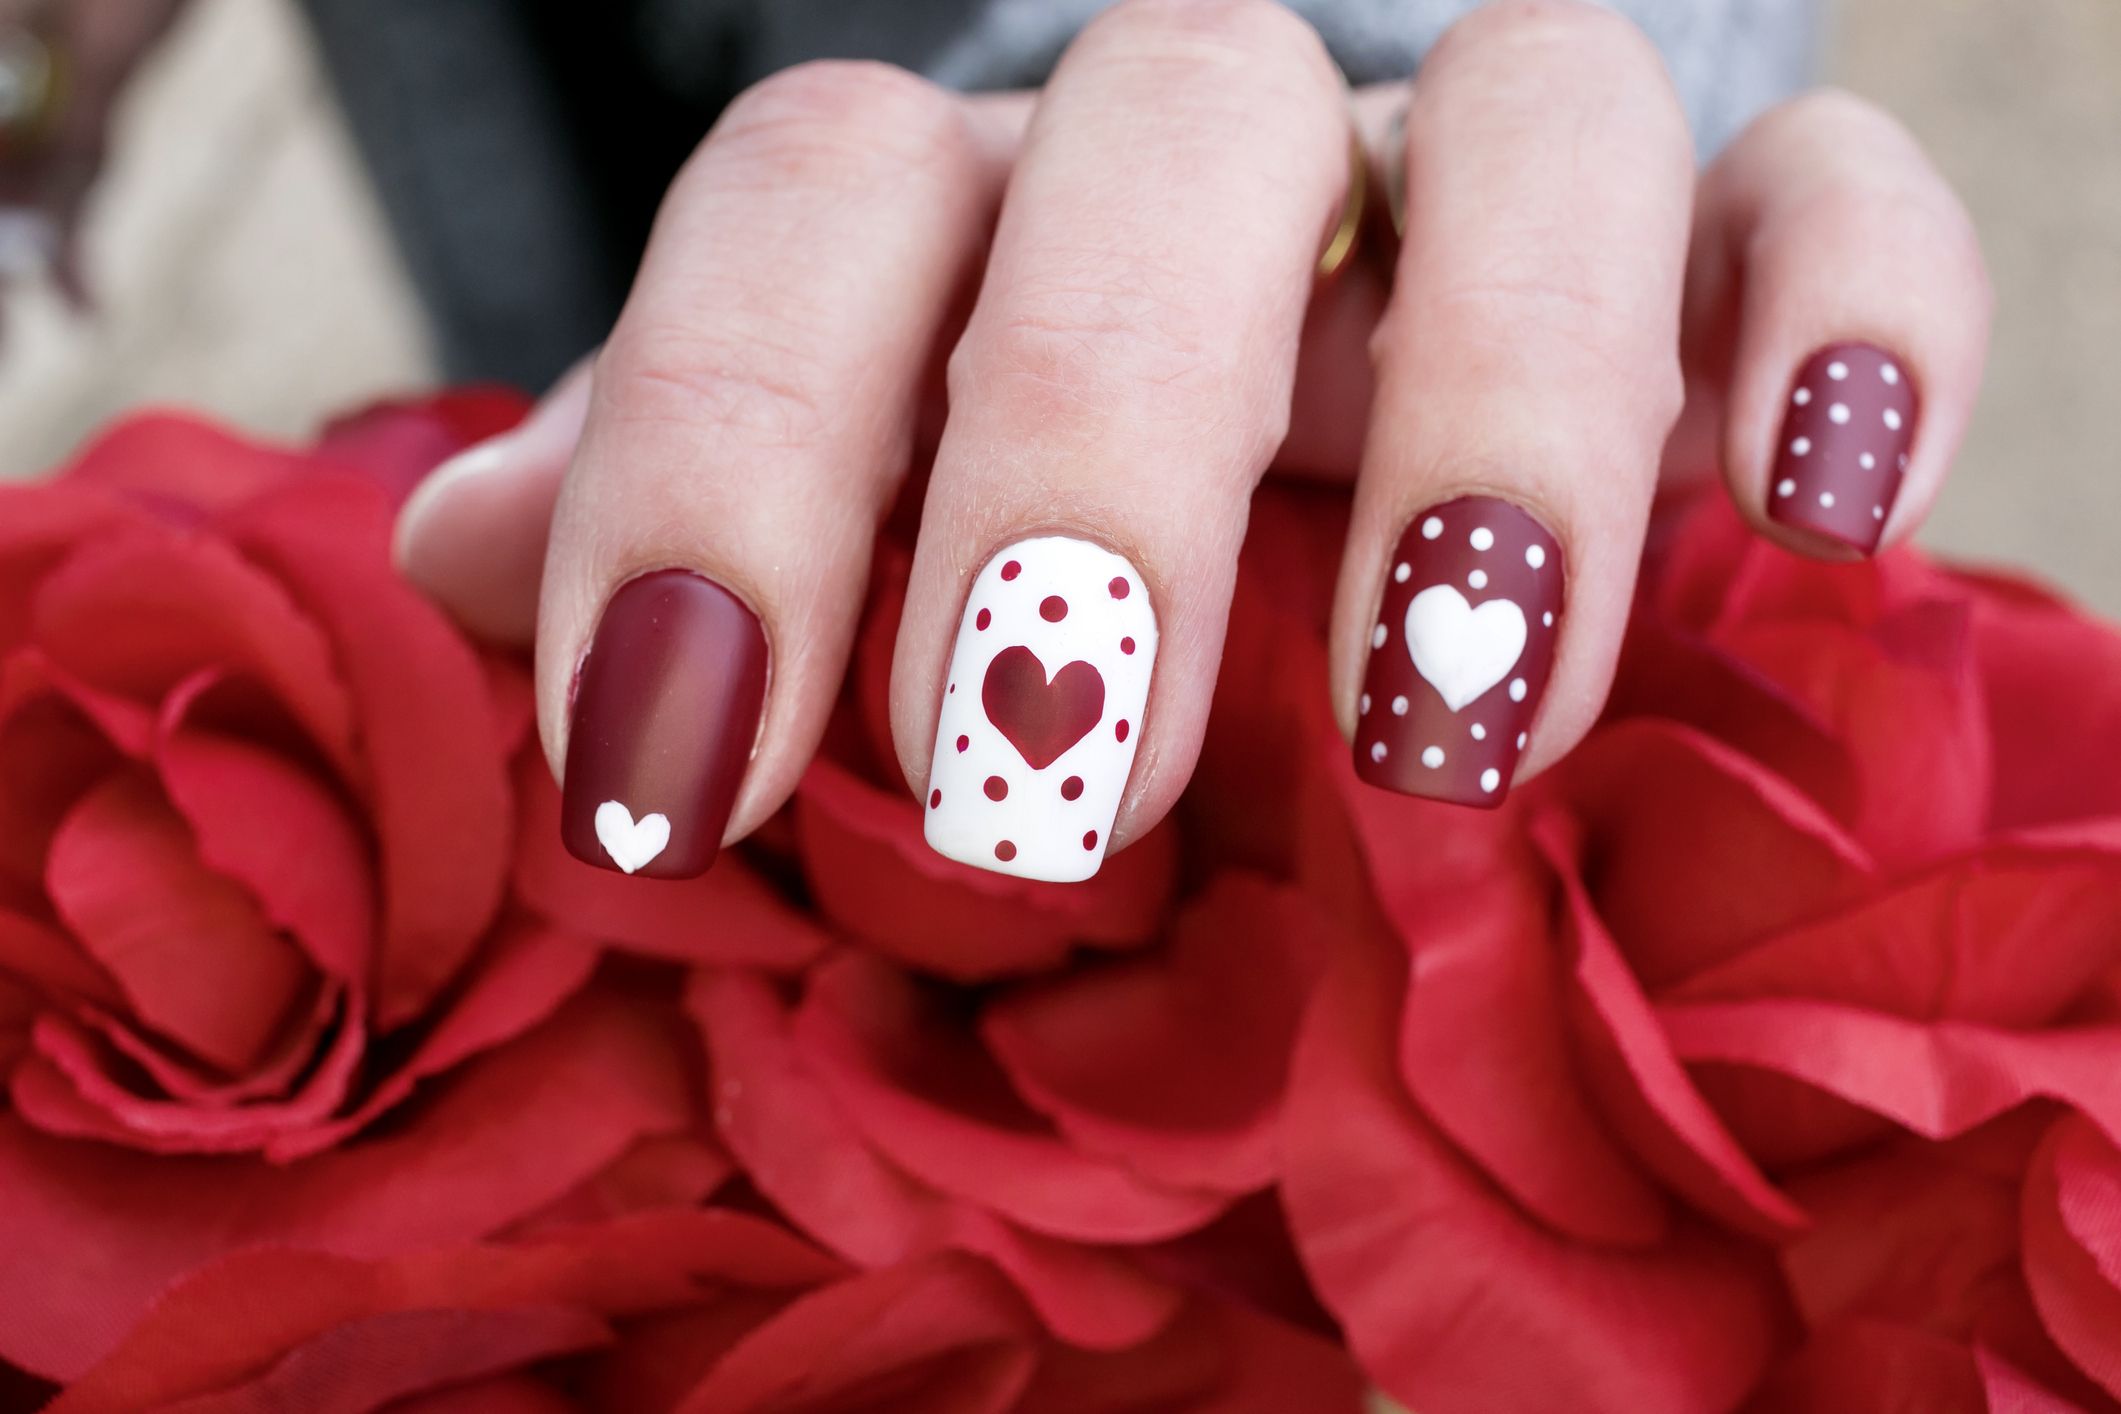 29 Best Valentine's Day Nail Designs - Cute Nail Polish Ideas for Valentine's Day